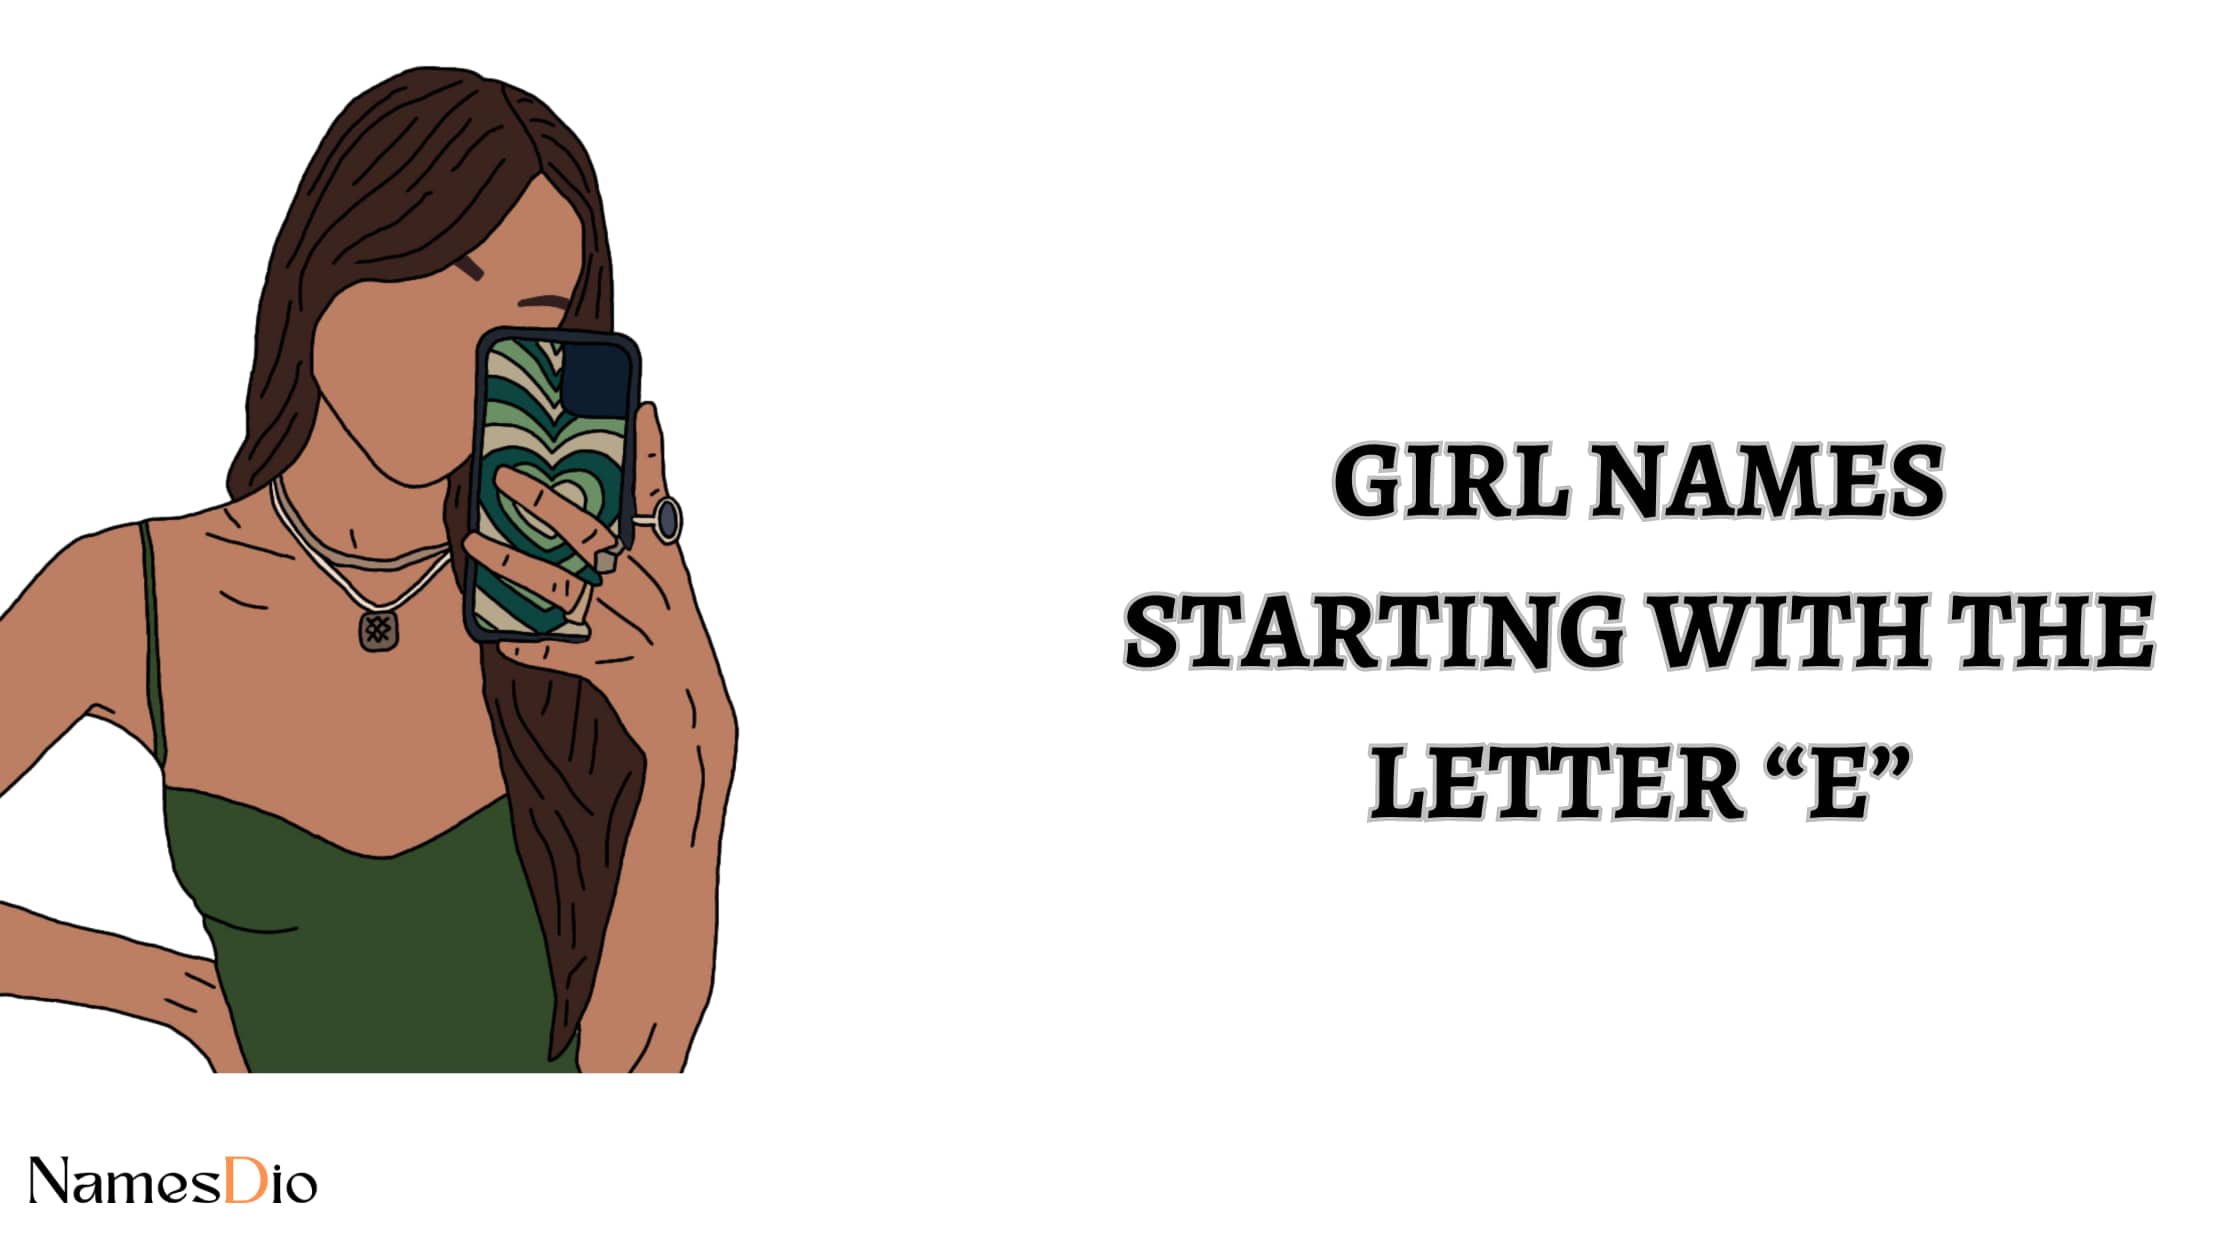 Girl-Names-Starting-With-The-Letter-E